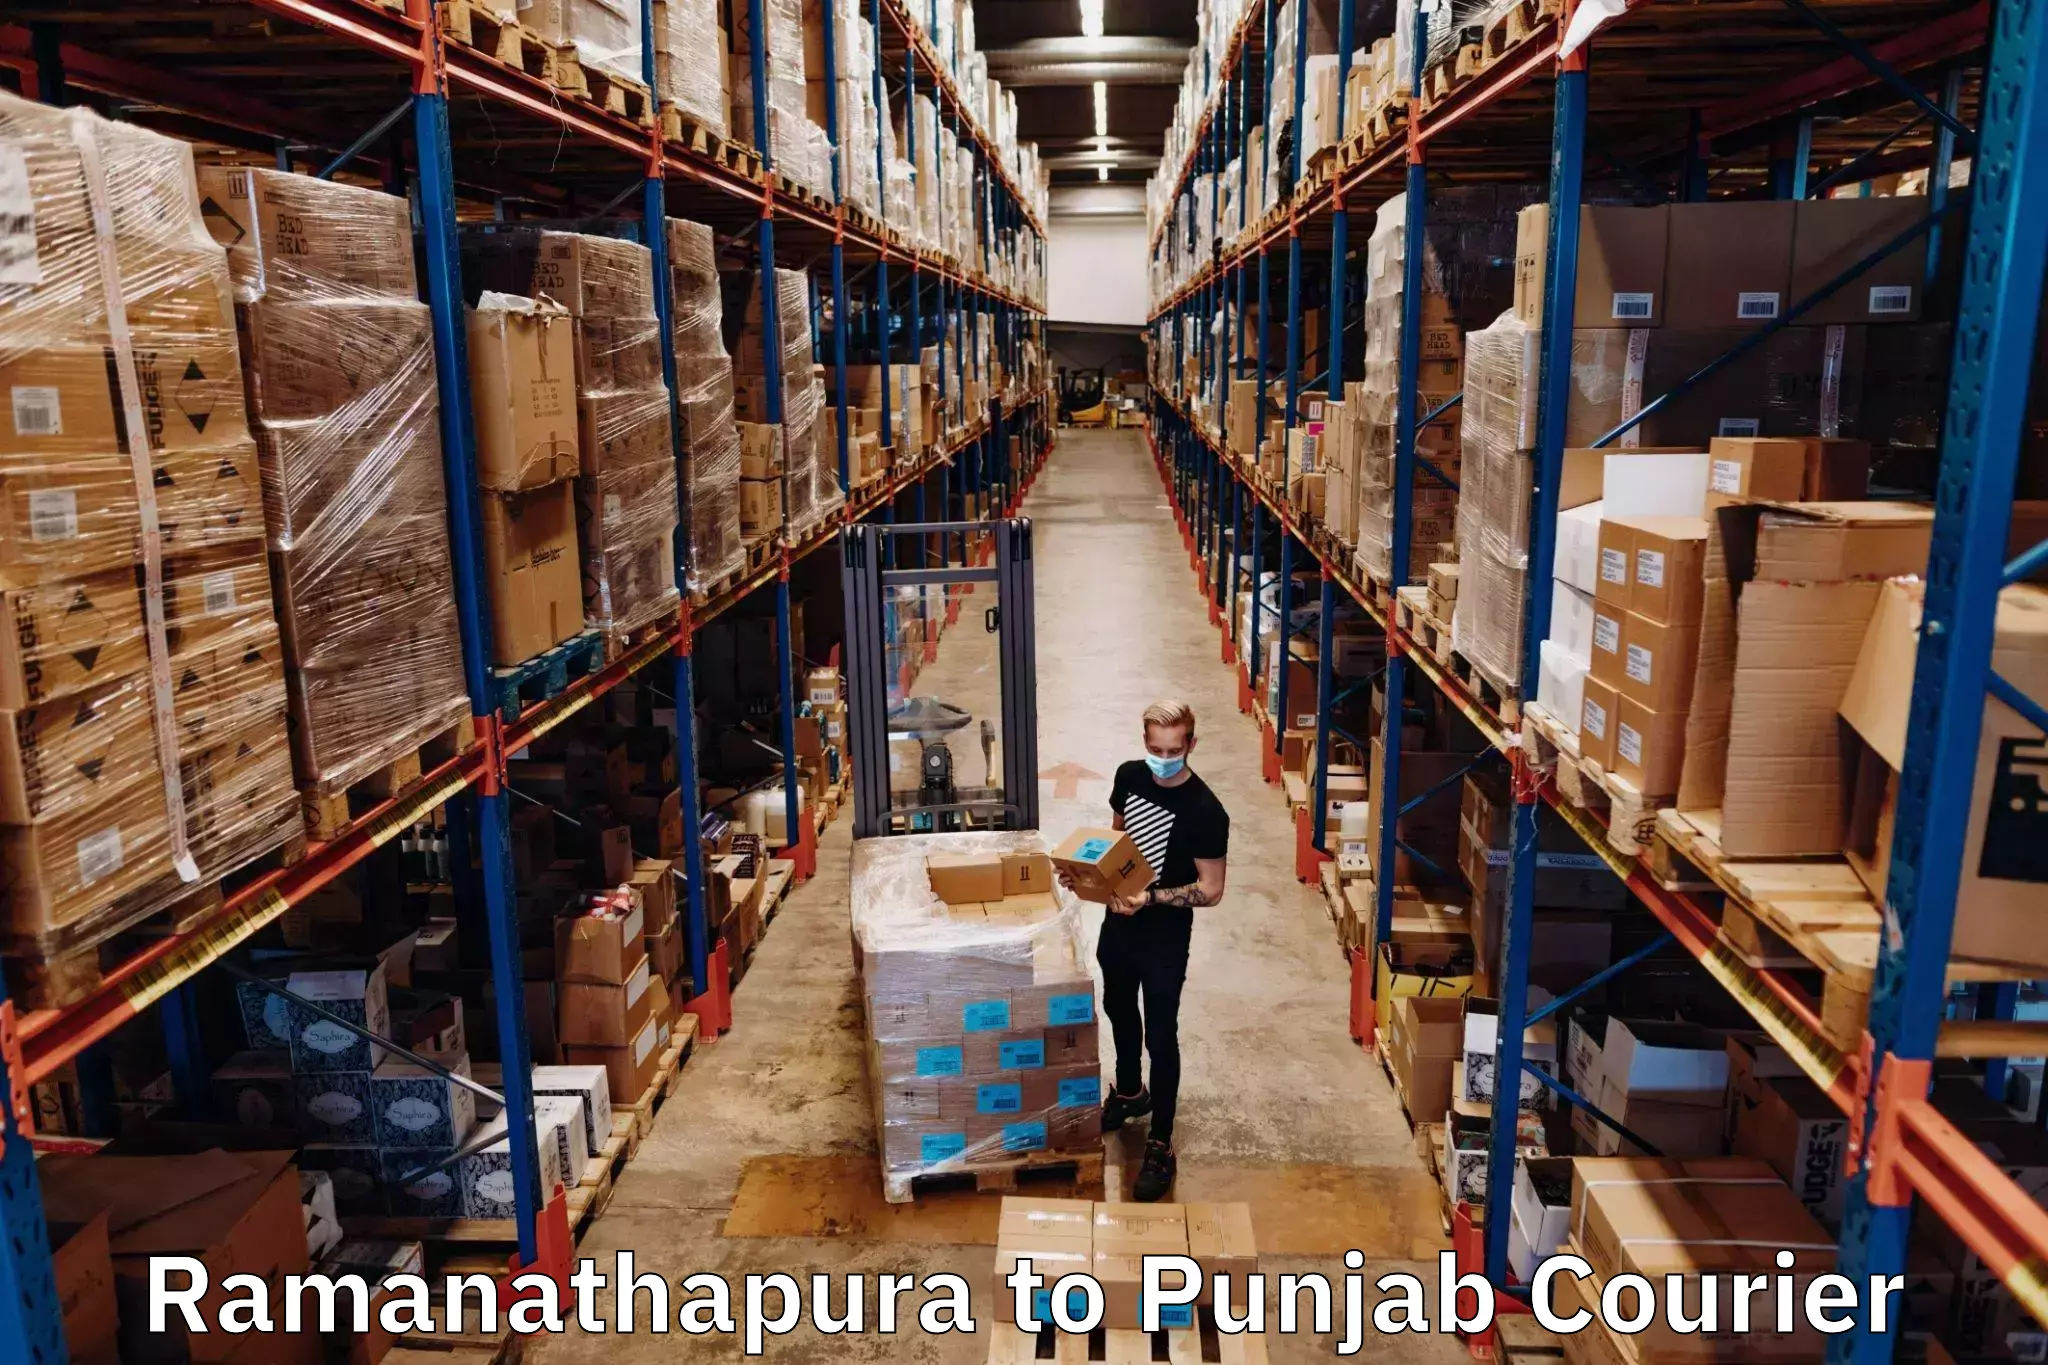 Flexible delivery scheduling in Ramanathapura to Patiala